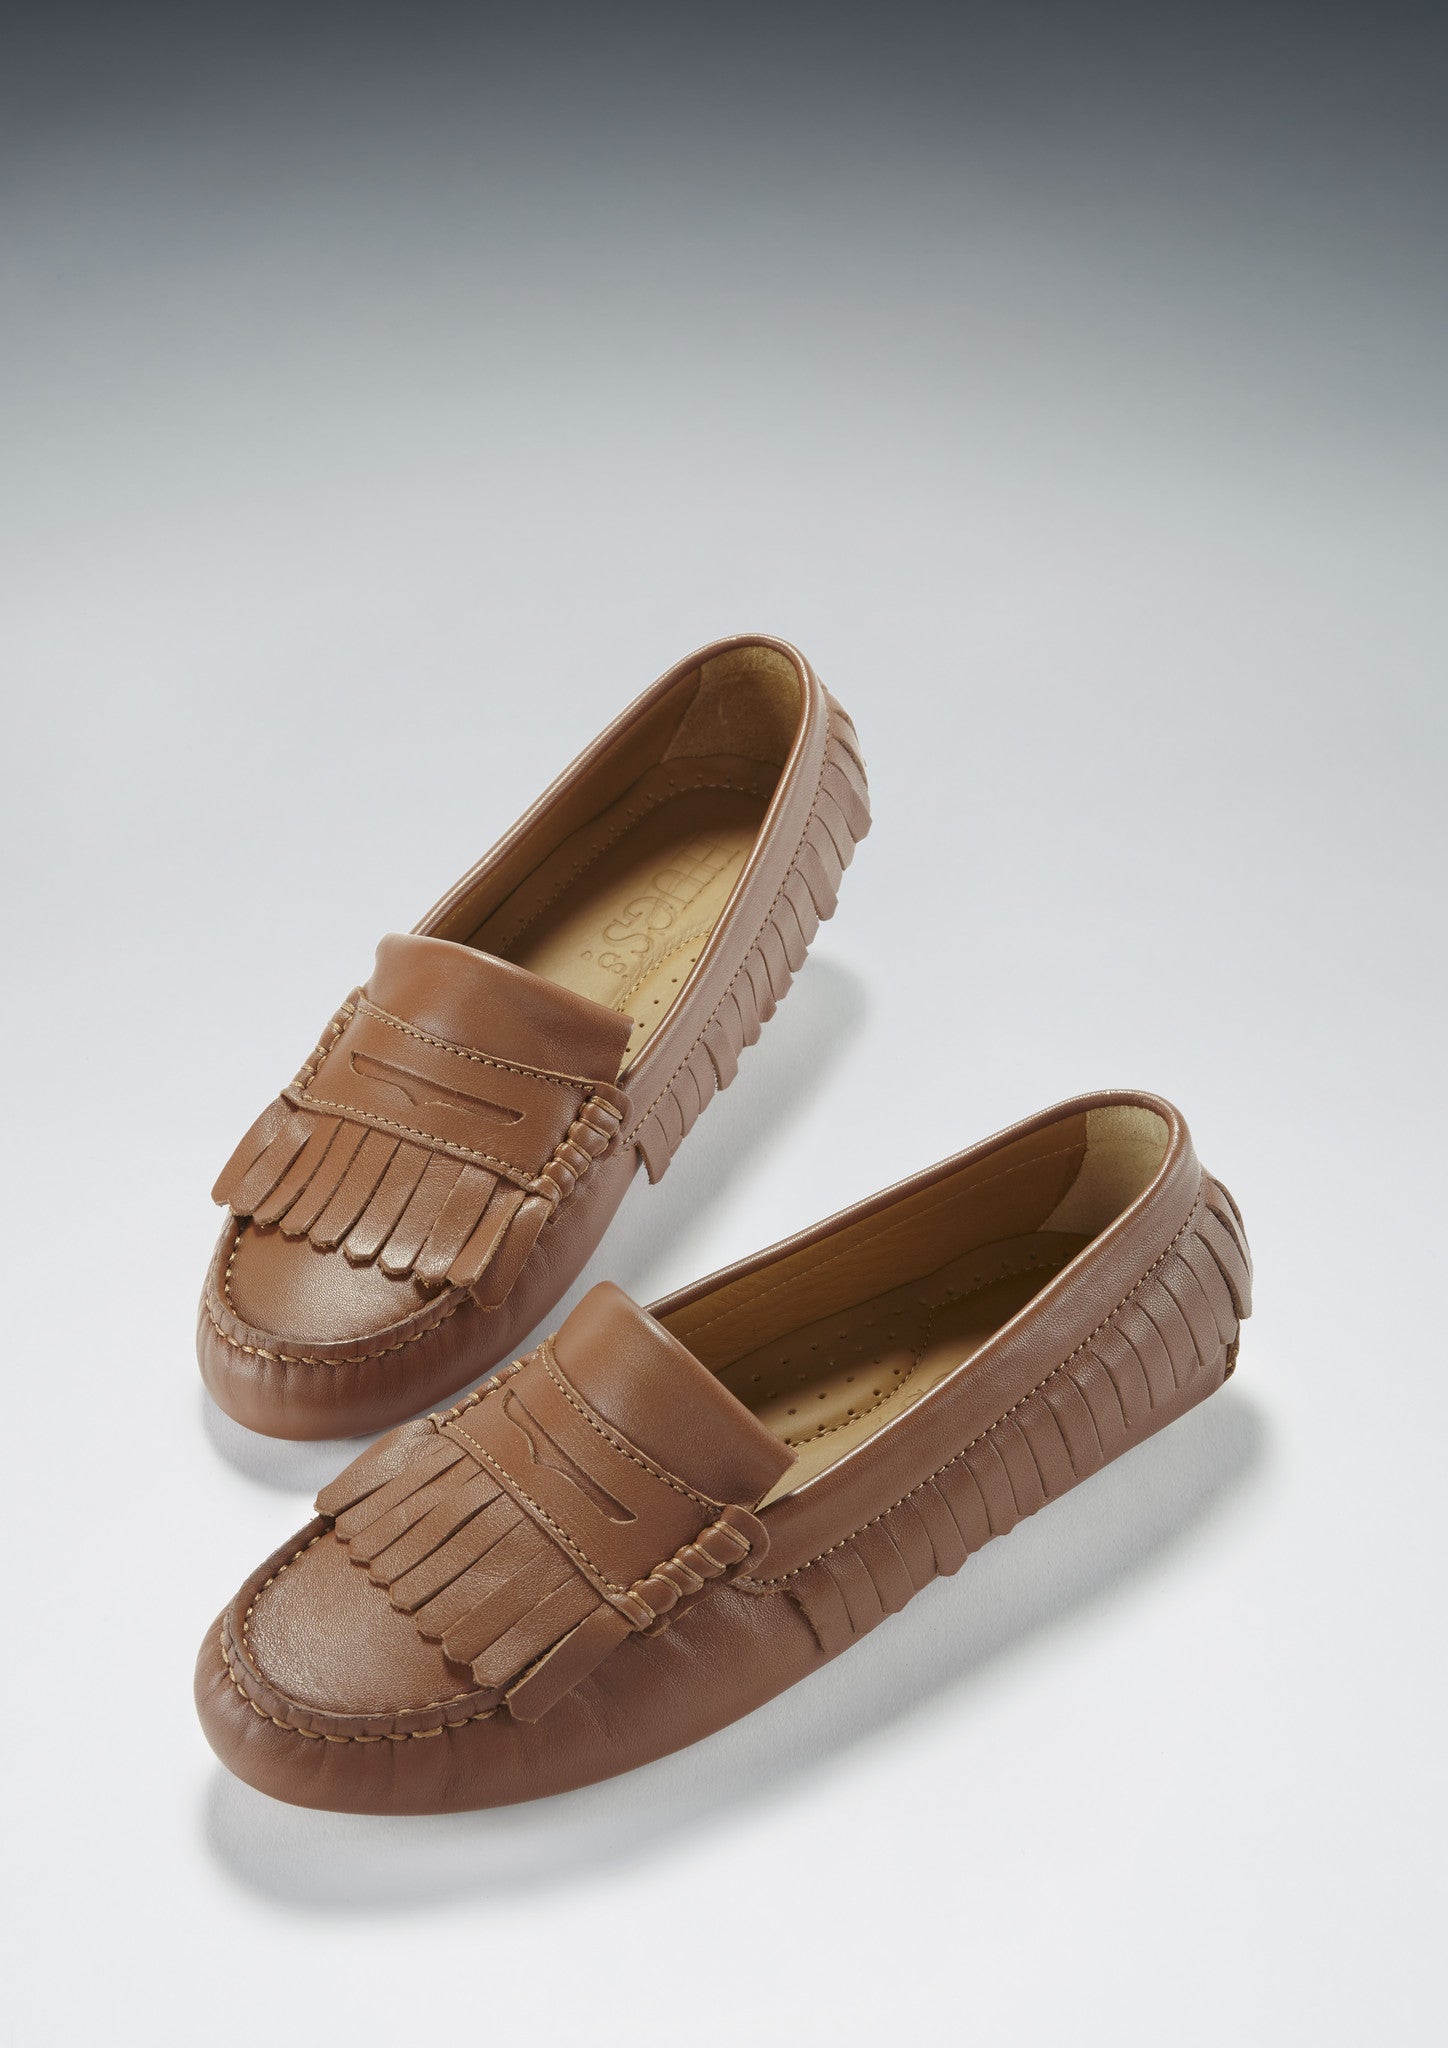 Women's Fringed Driving Loafers, light tan leather